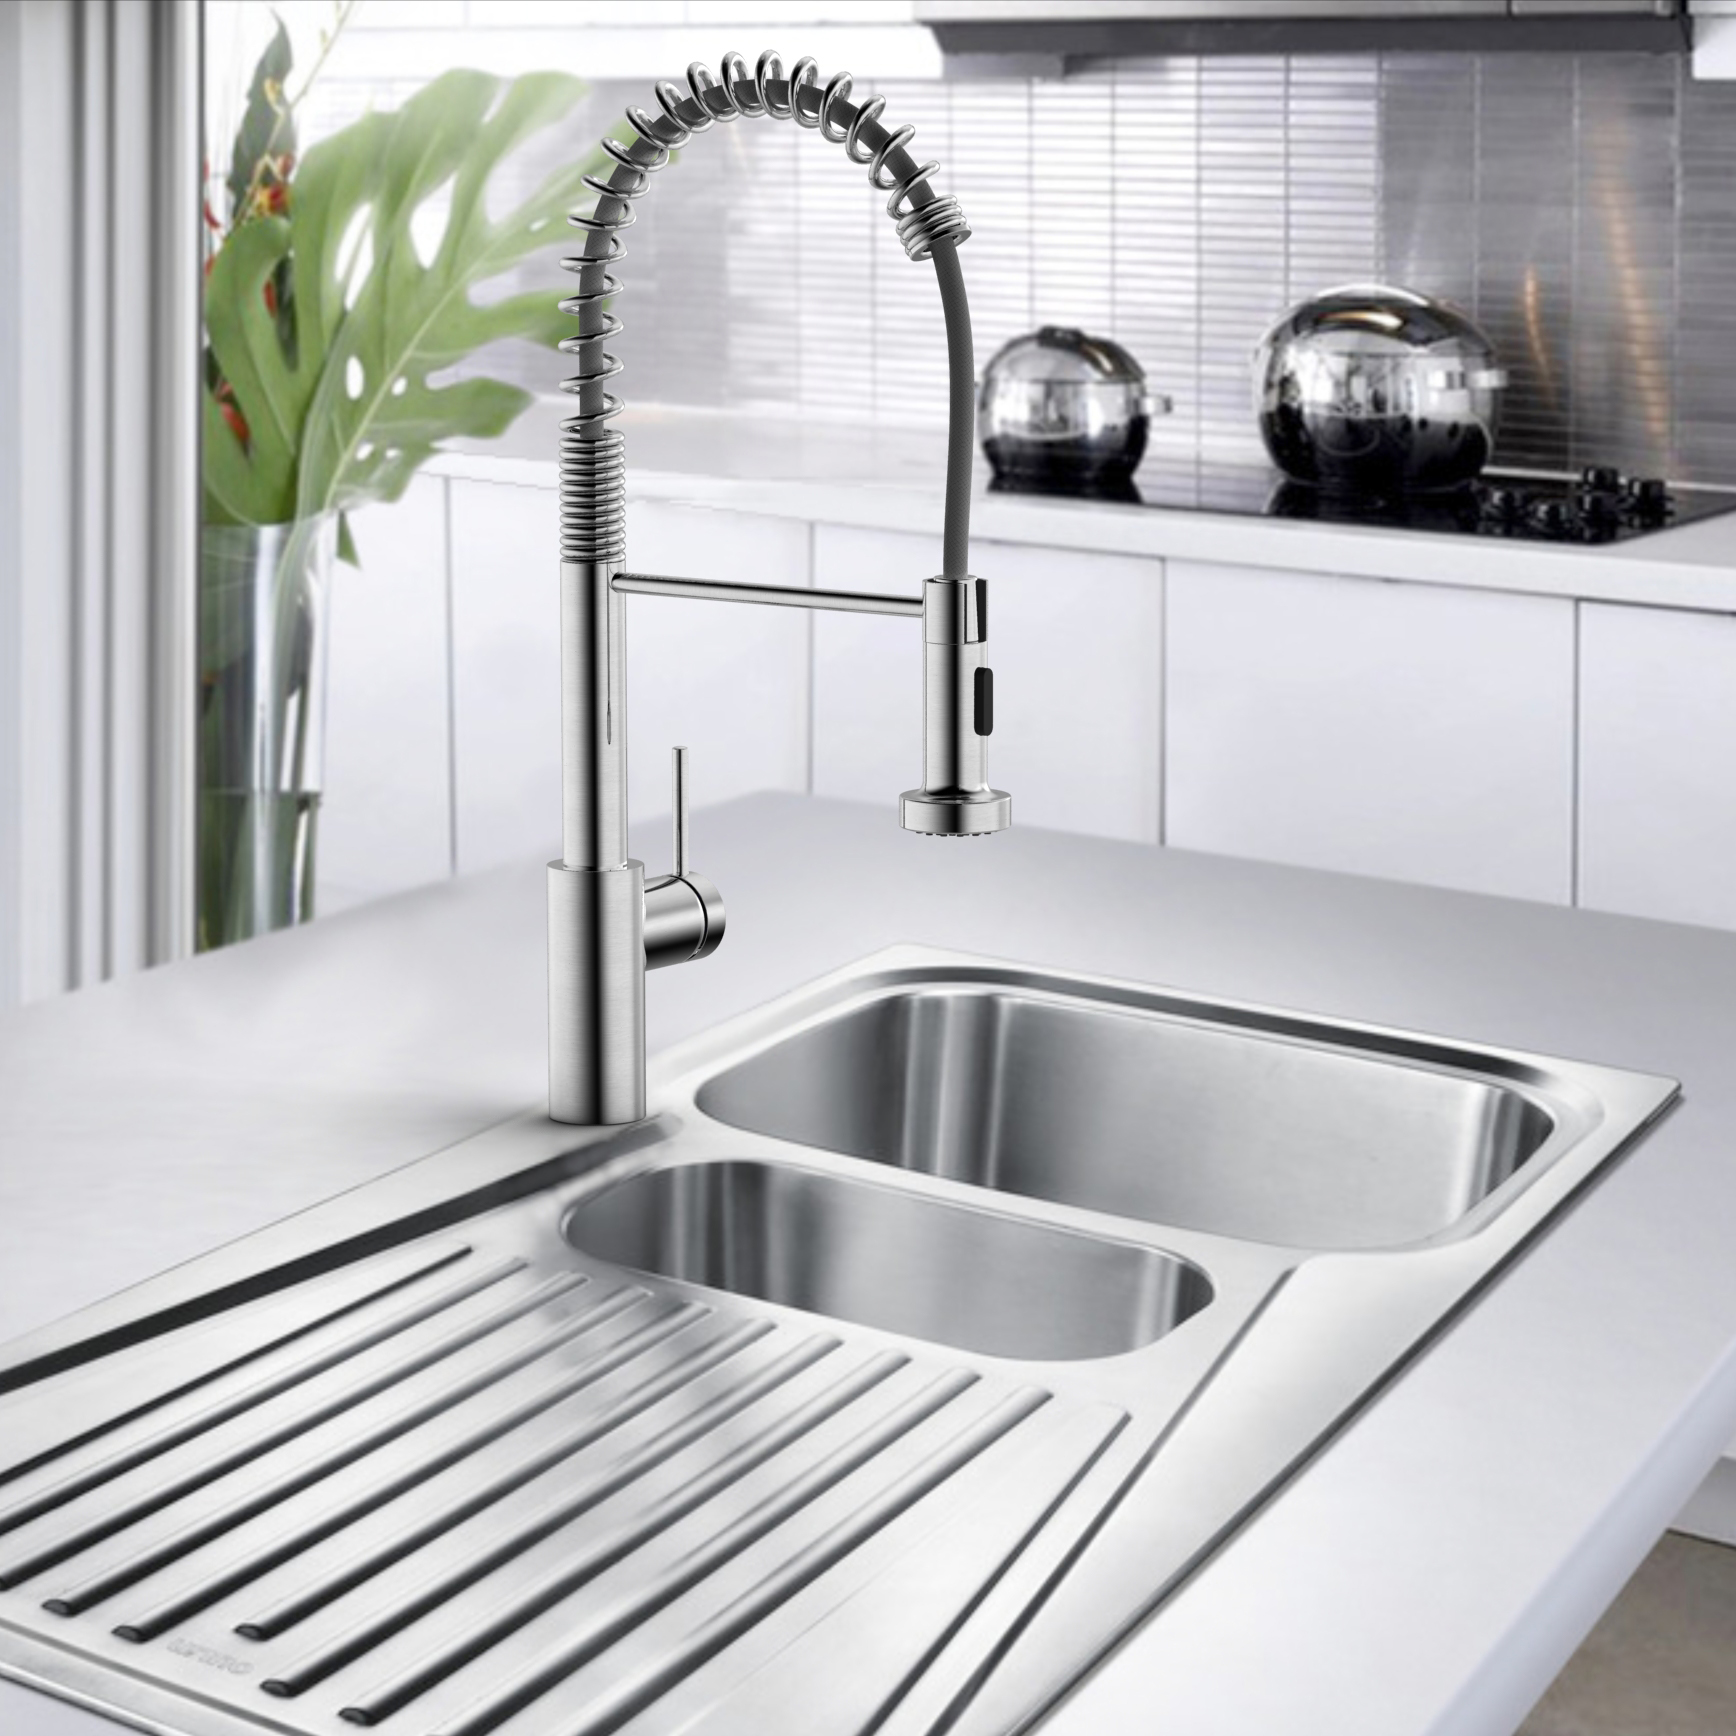 New Modern Style SUS304 Kitchen Faucet Pull Down Spring Water Sink Mixer Tap Kitchen Faucets With Sprayer